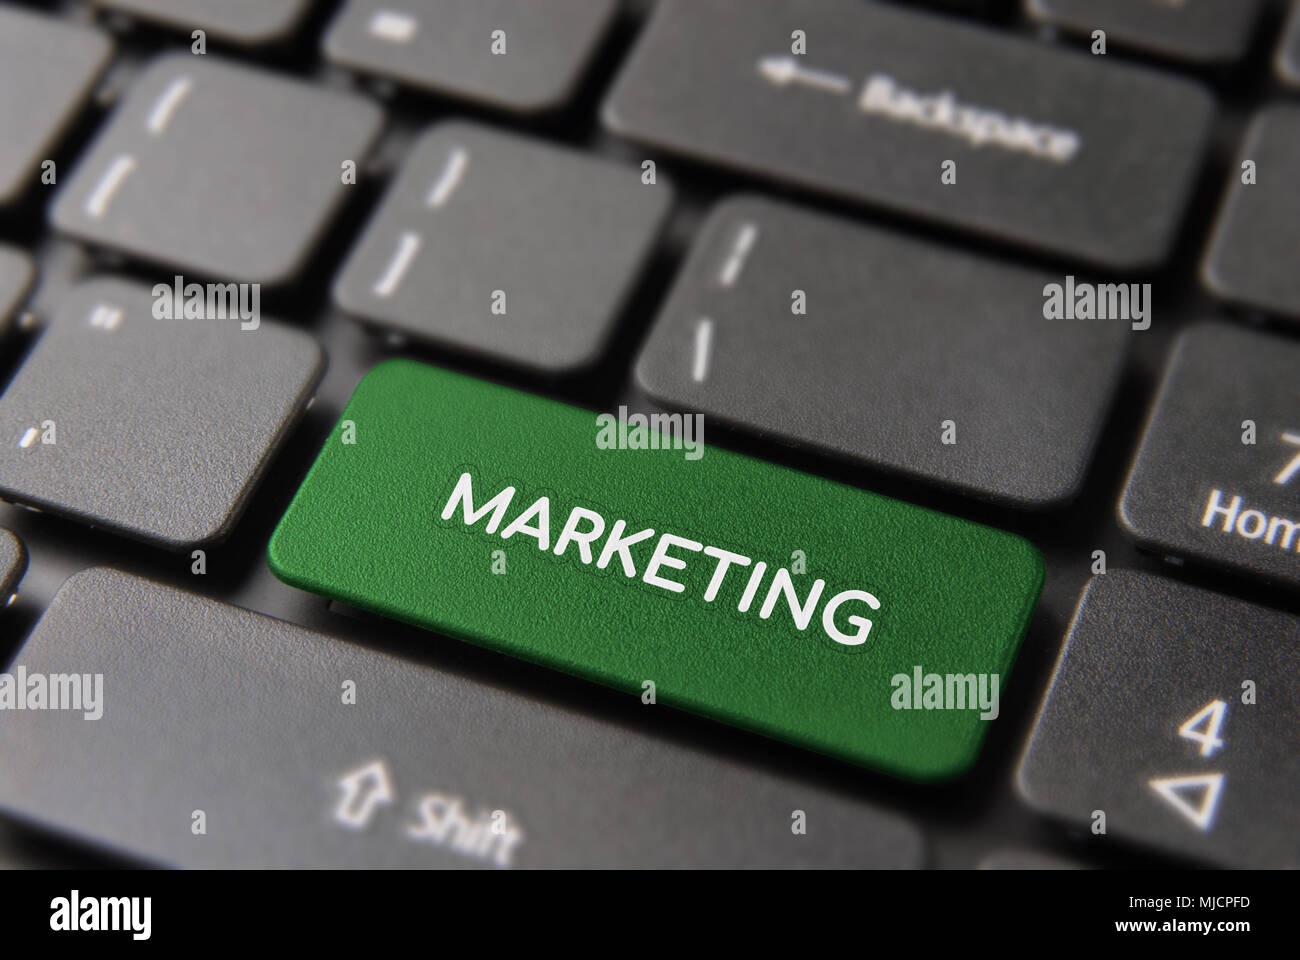 Digital marketing service concept, green computer button with text for online internet business. Stock Photo